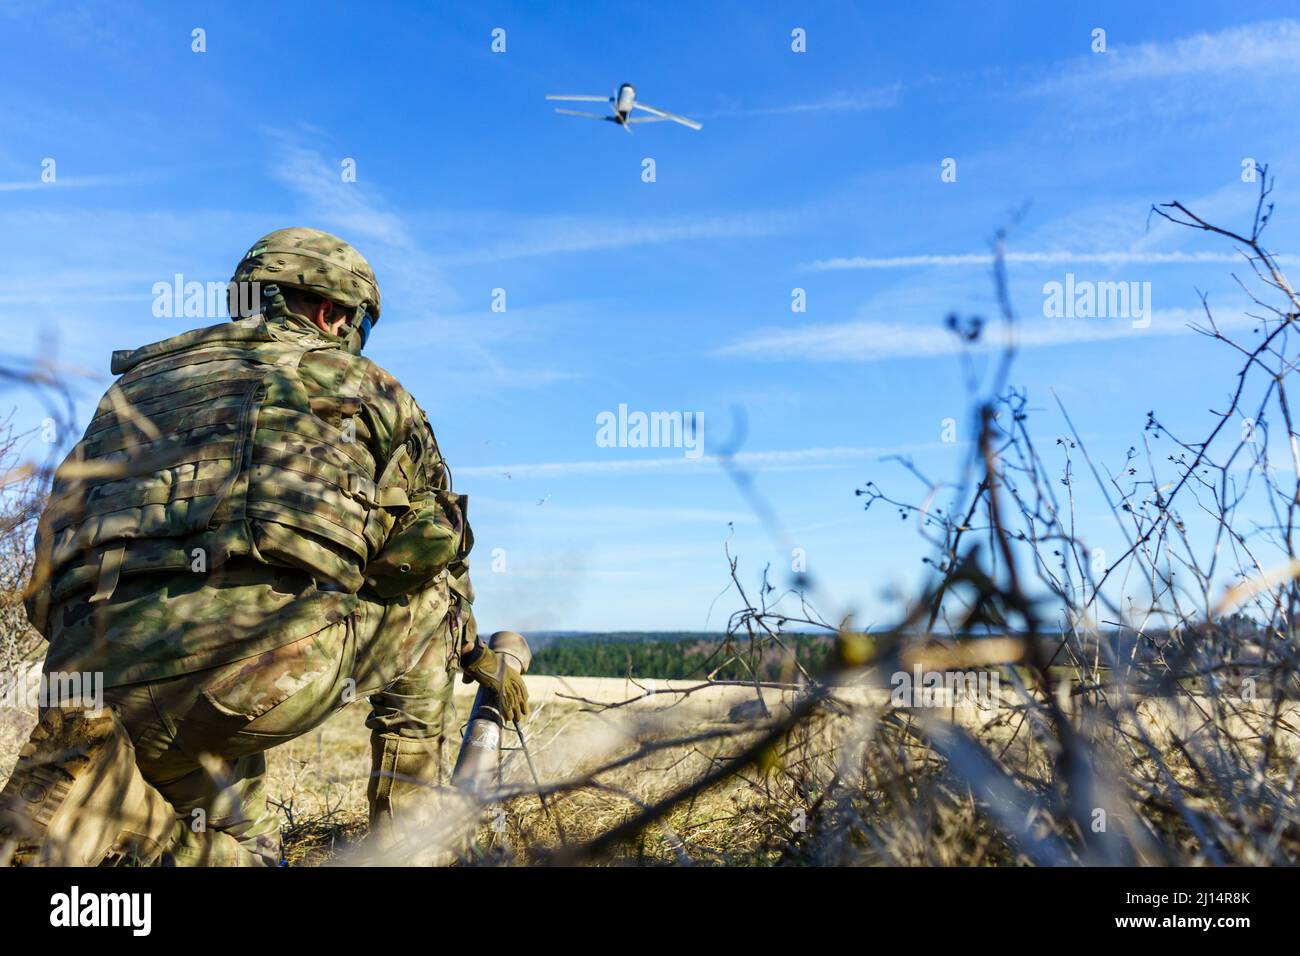 Grafenwoehr, Germany. 06 April, 2018. U.S. Army Pvt. 1st Class Brandon Norton, with 1st Infantry Division, launches a Switchblade 300 lethal miniature aerial missile system during a Robotic Complex Breach Concept assessment and demonstration at Grafenwoehr Training Area, April 6, 2018 in Grafenwoehr, Germany.  Credit: Sgt. Gregory T. Summers/US Army/Alamy Live News Stock Photo